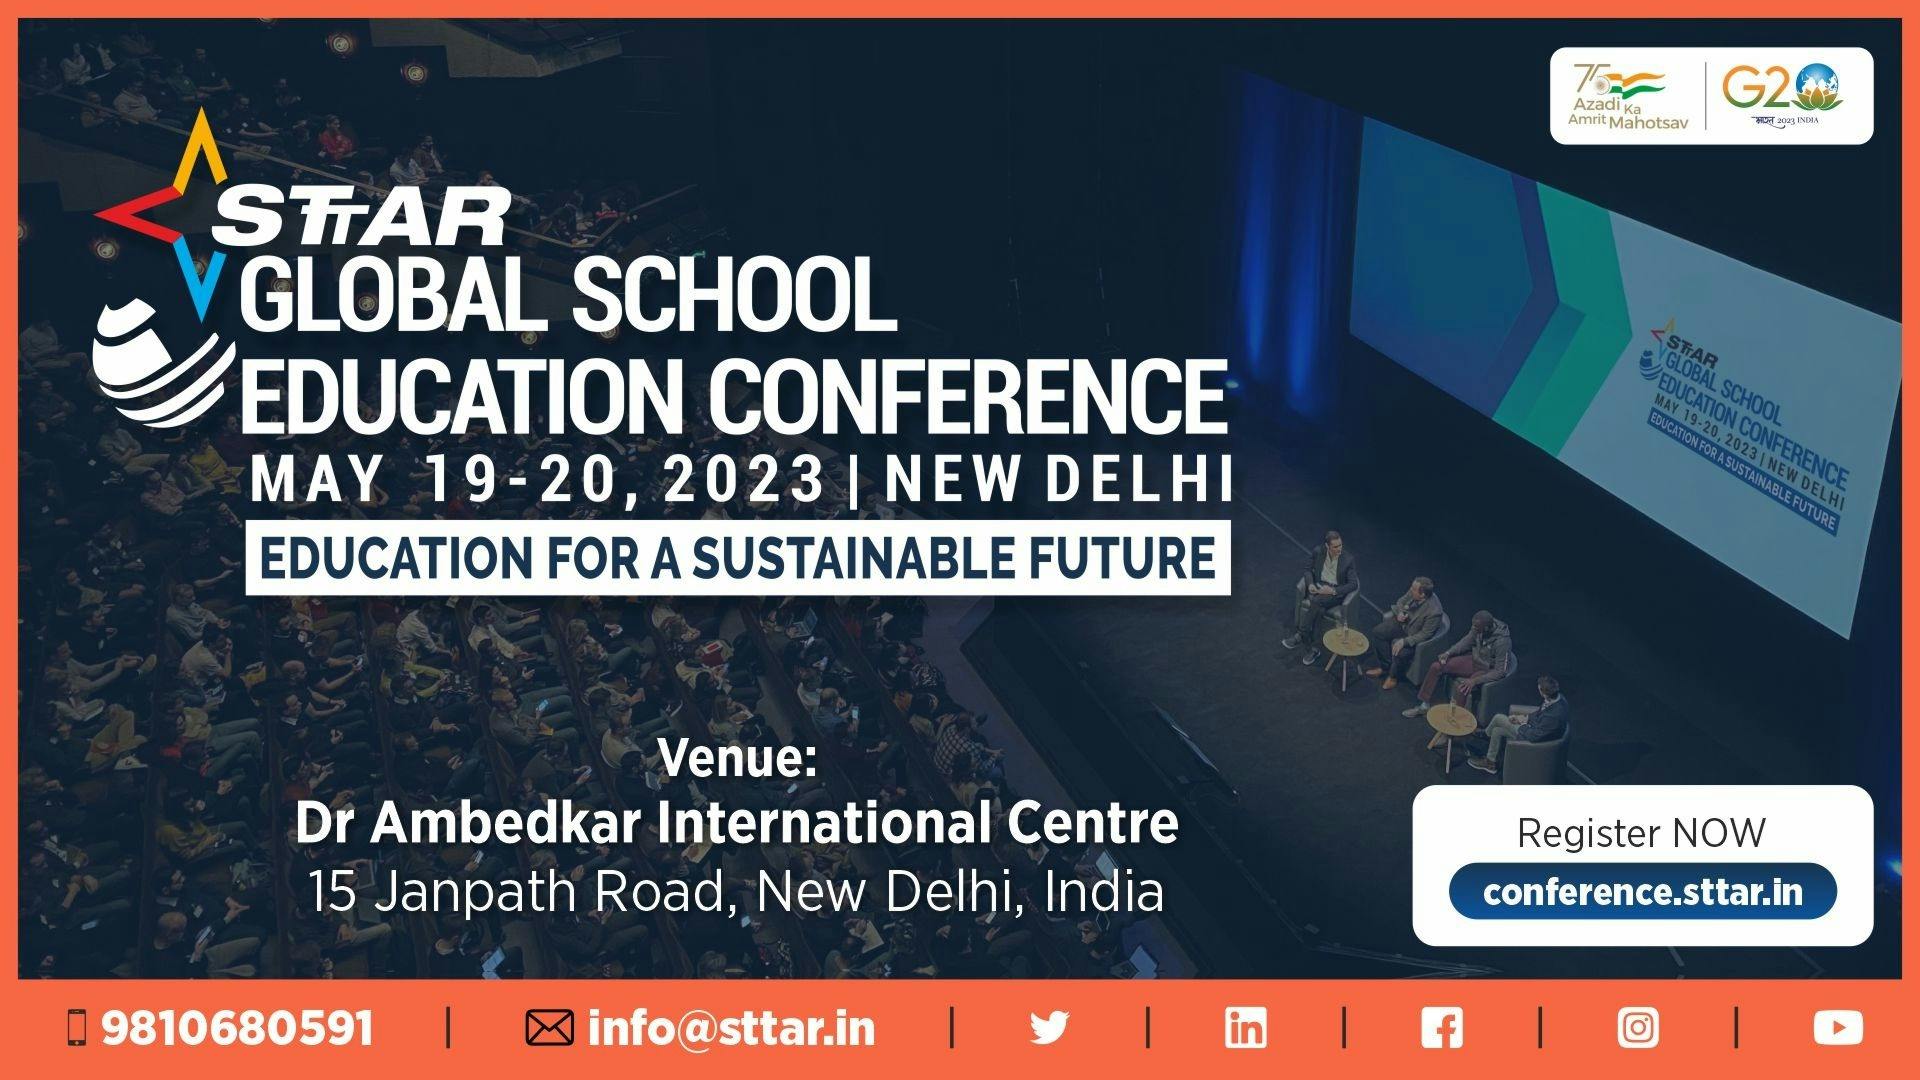 Sttar Global School Education Conference